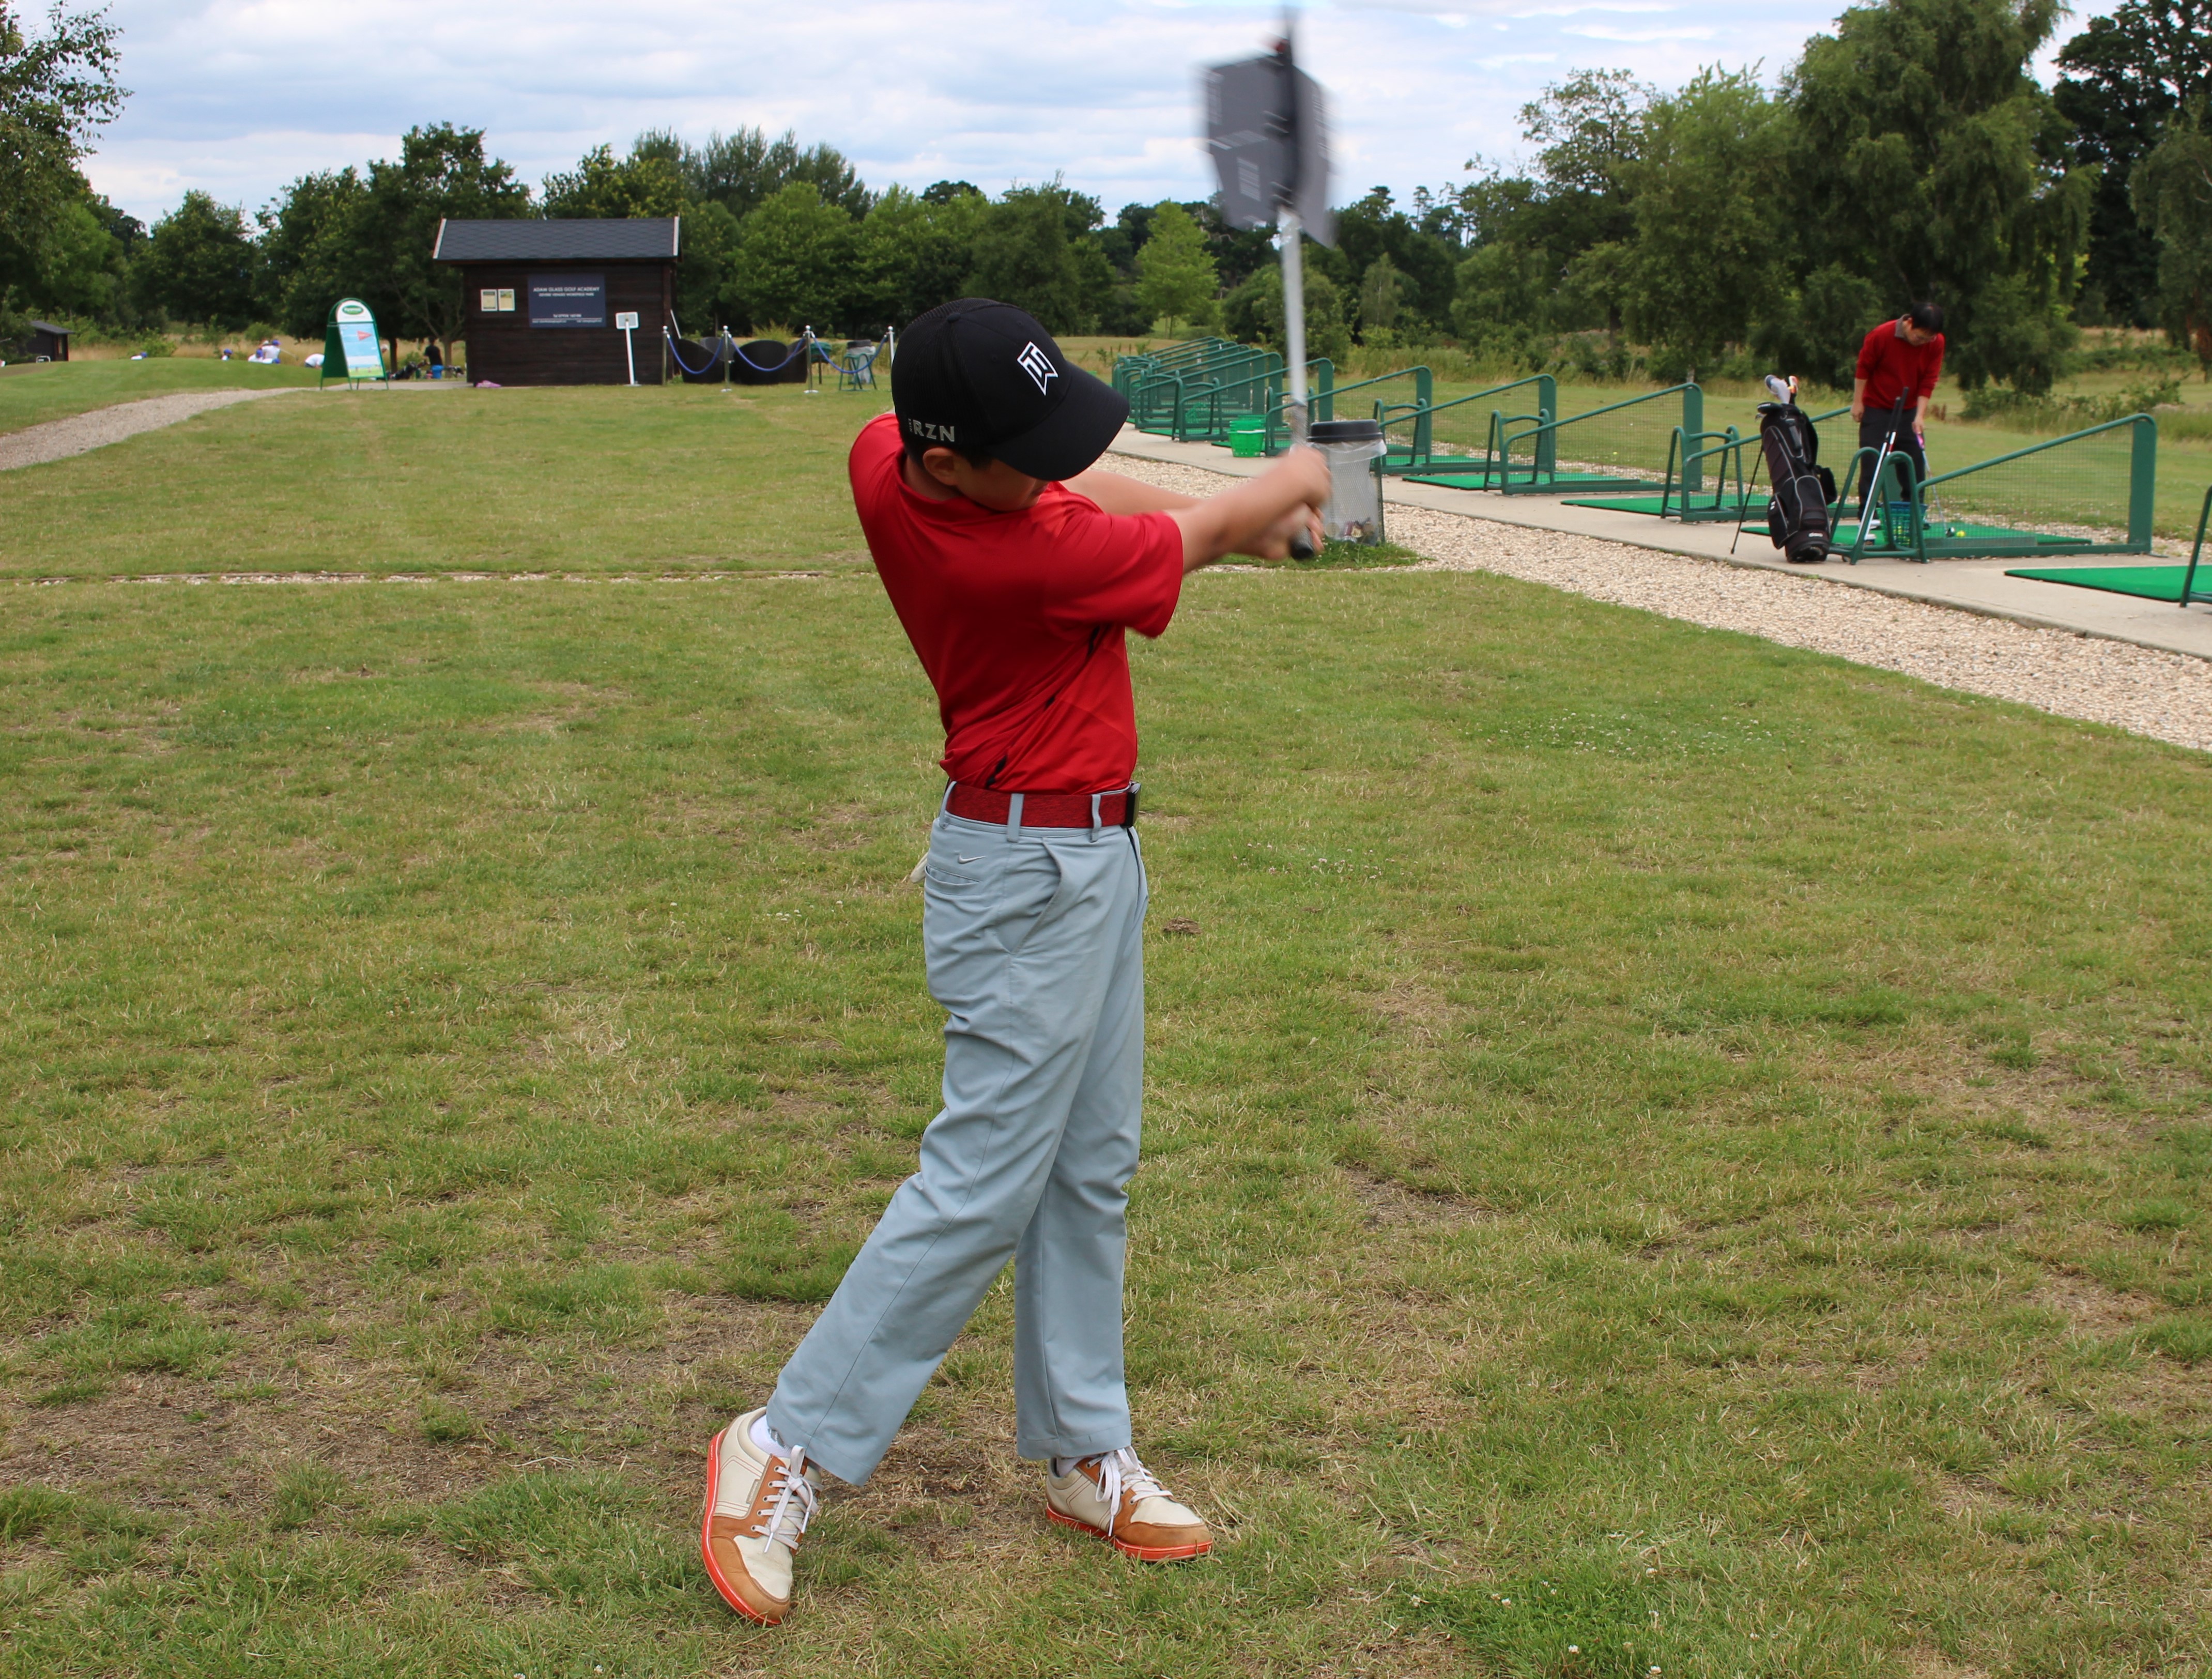 Page 2: How best to develop junior golfers